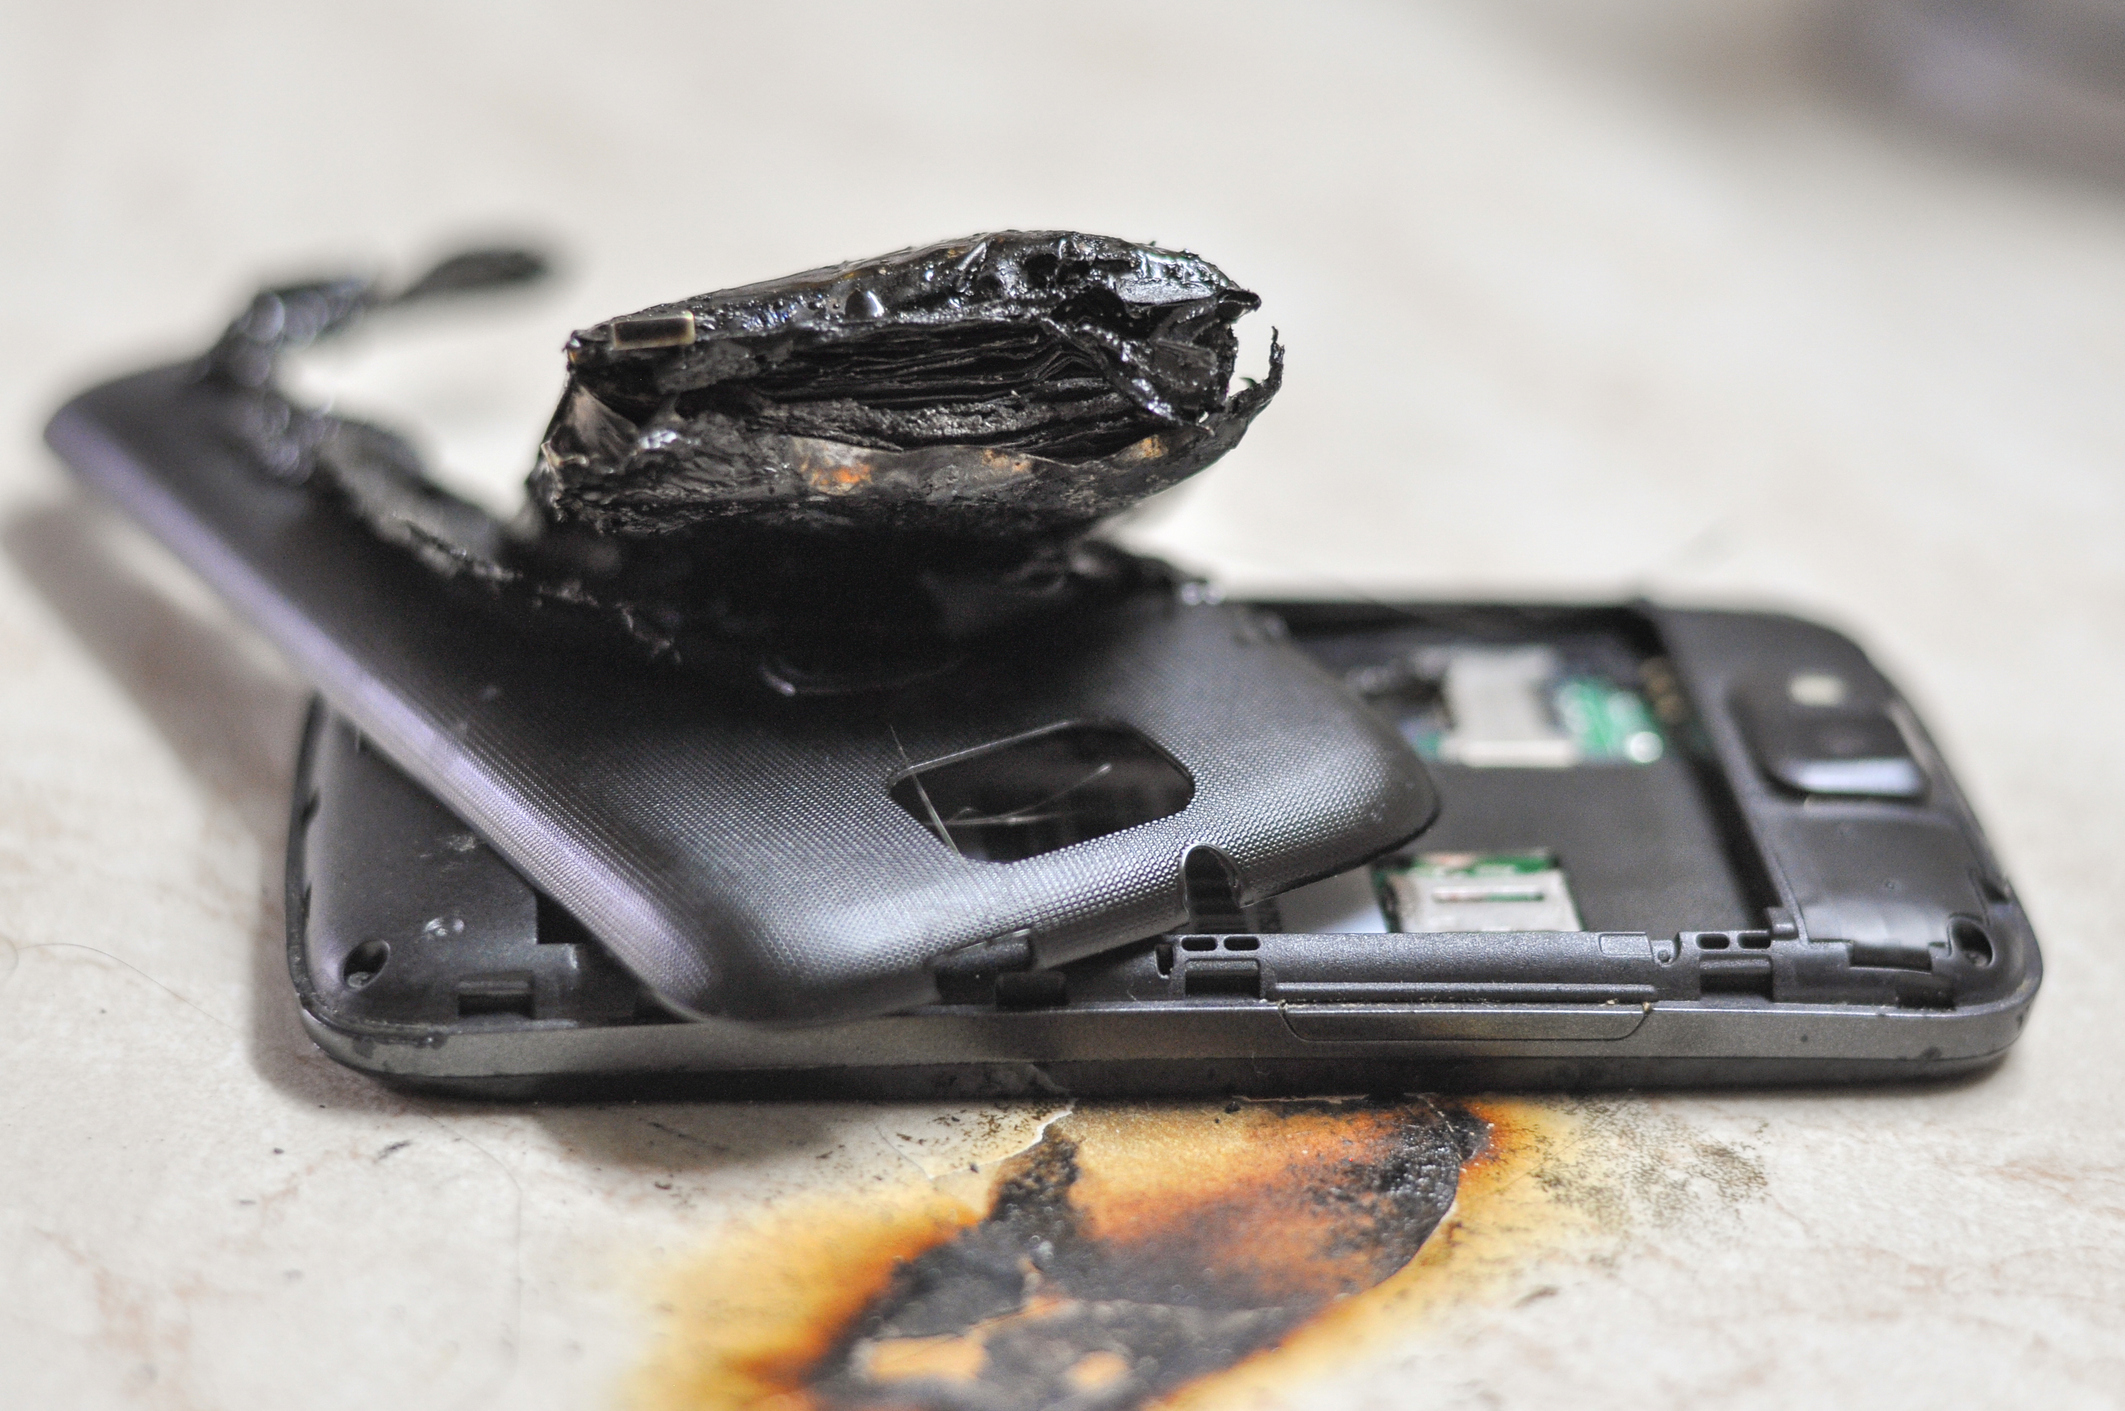 Safety Alert! Take Your Phone Out of Your Case & Inspect It to Avoid a Possible Fire Risk – Pixels, iPhones, & More Are at Risk